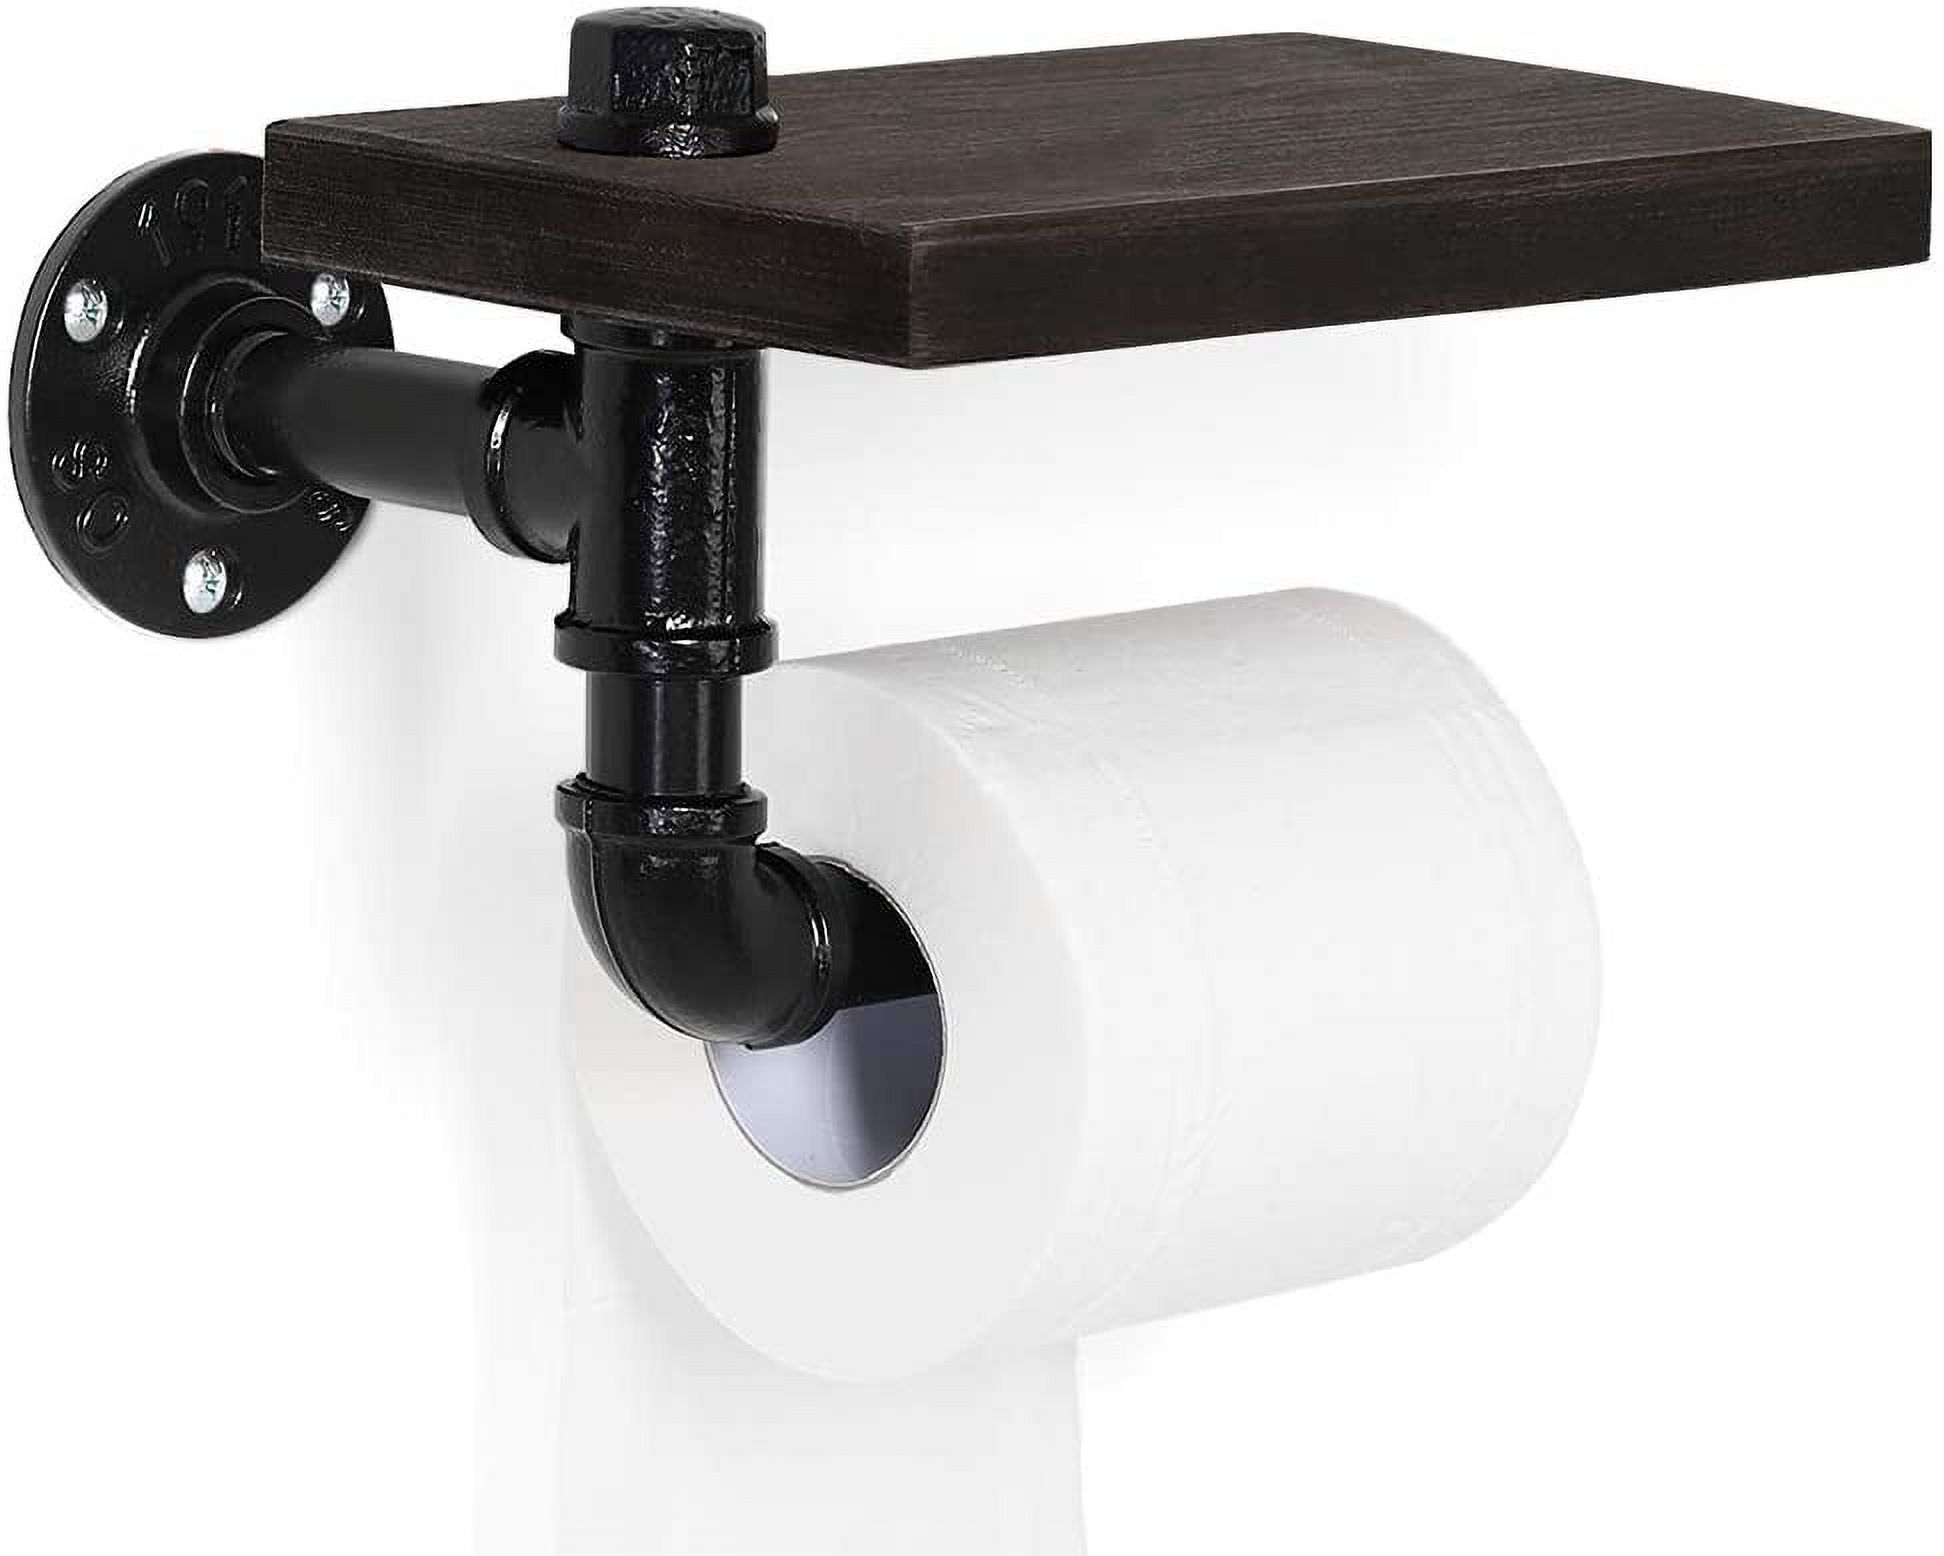 Weathered Gray Wood and Black Industrial Pipe Paper Towel Roll Holder Dispenser with Shelf, Wall Mounted or Countertop